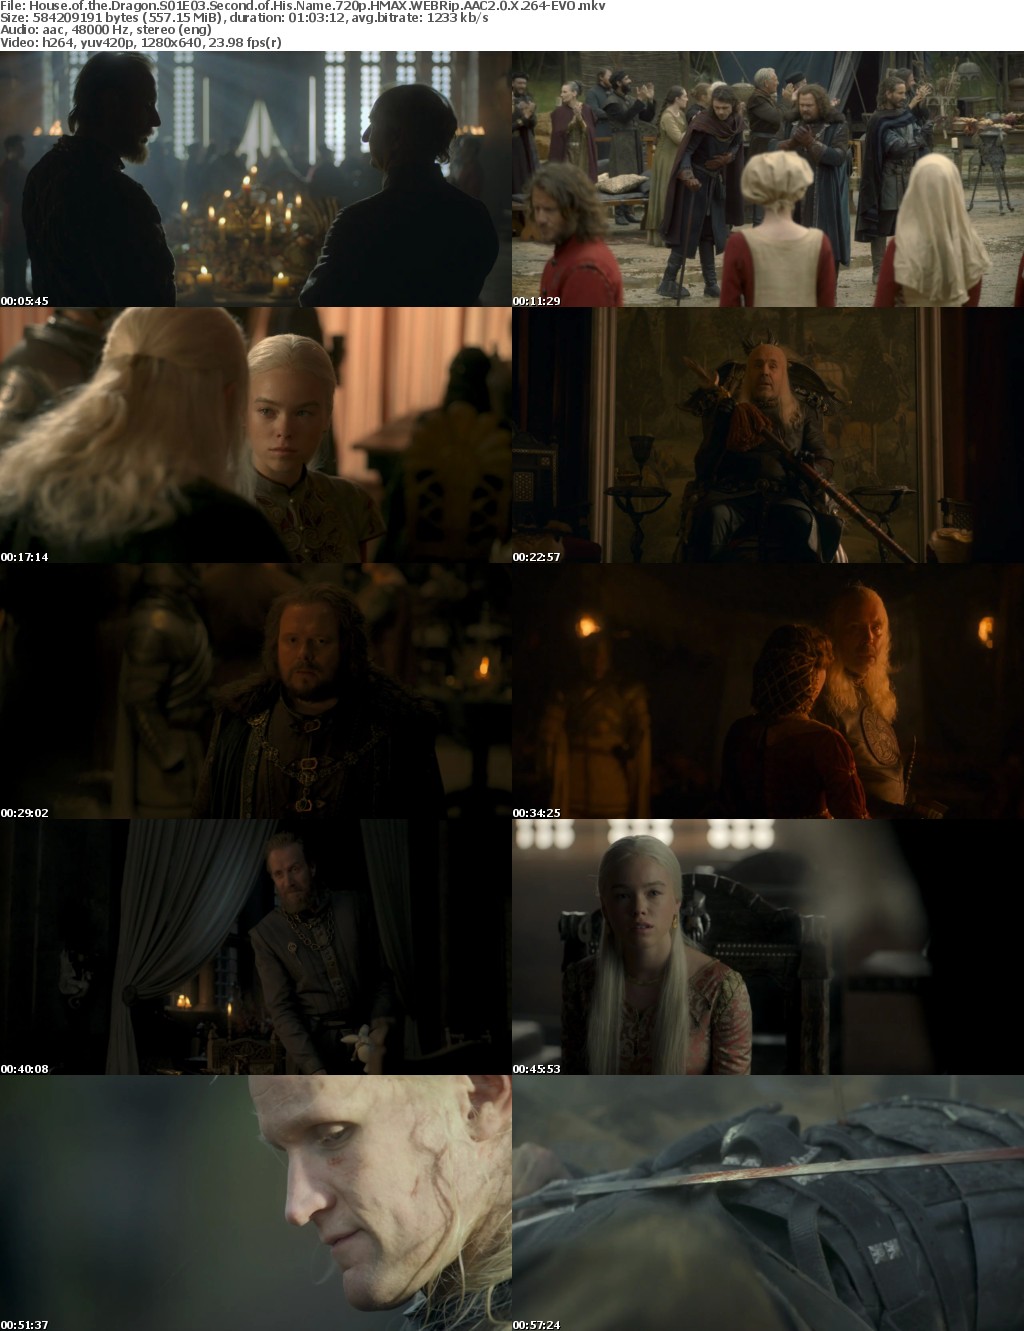 House of the Dragon S01E03 Second of His Name 720p HMAX WEBRip AAC2 0 X 264-EVO